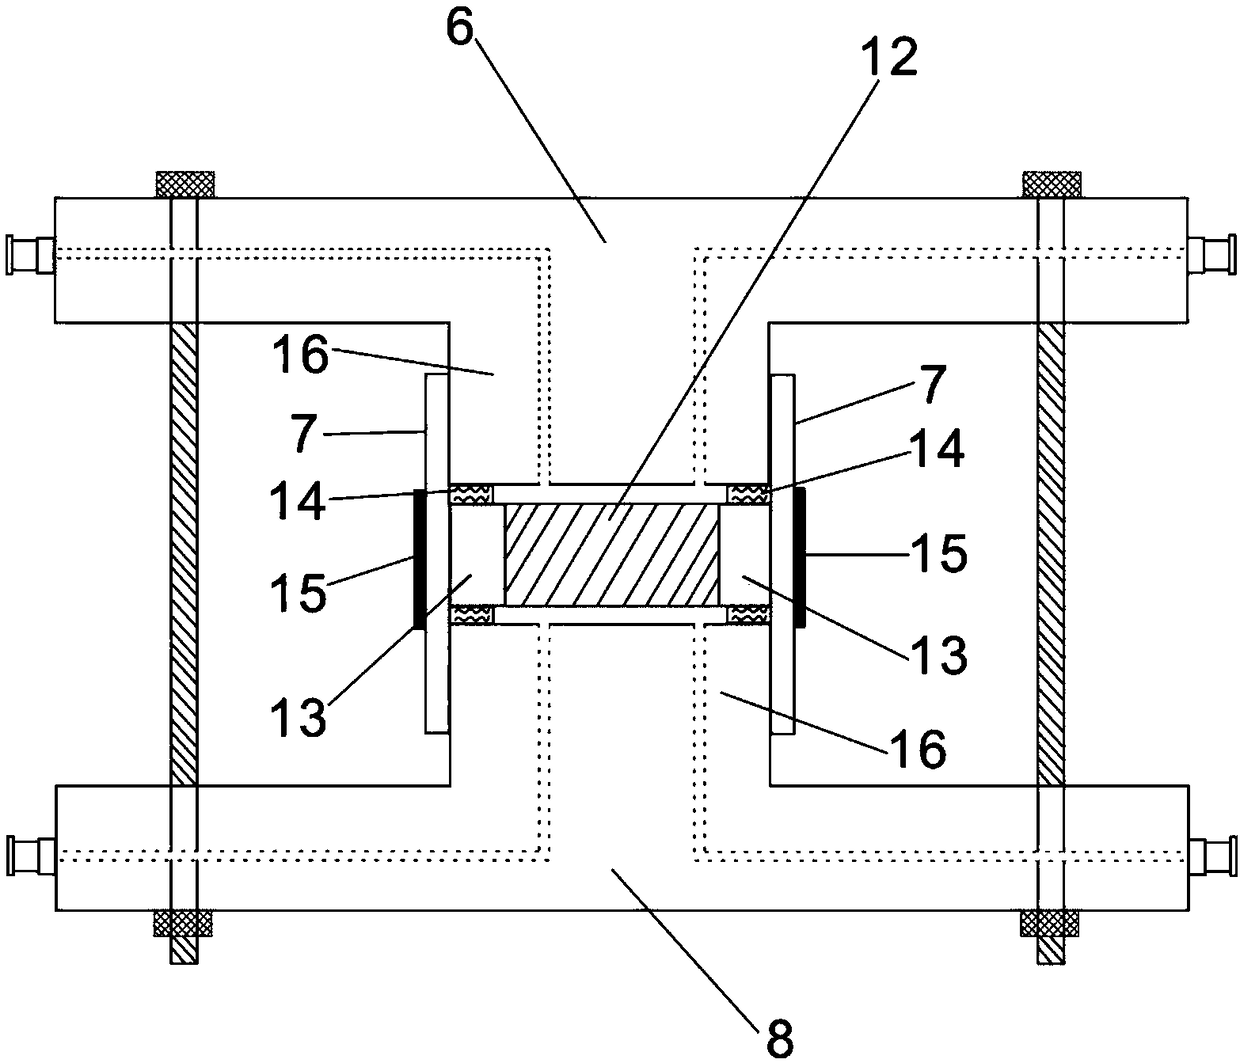 Rock diffusion coefficient measuring device and method